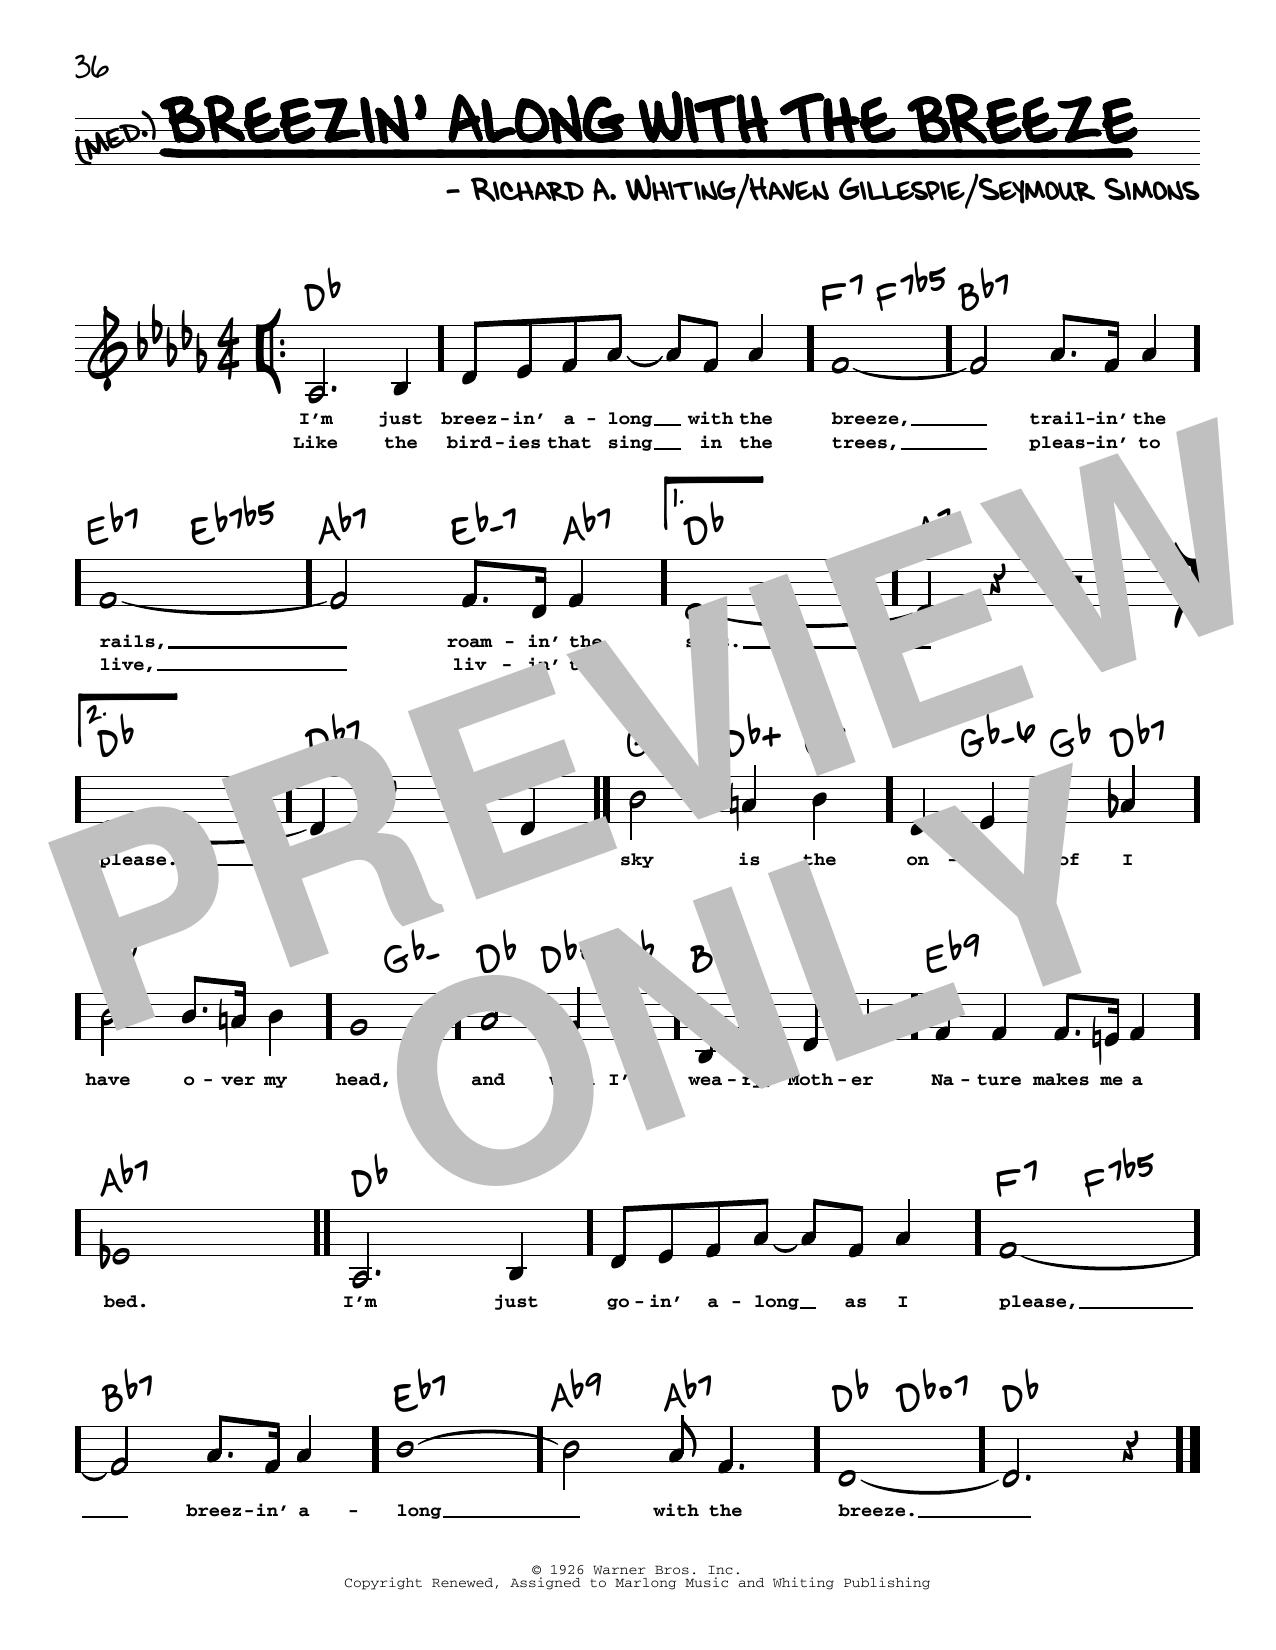 Haven Gillespie Breezin' Along With The Breeze (Low Voice) sheet music notes printable PDF score